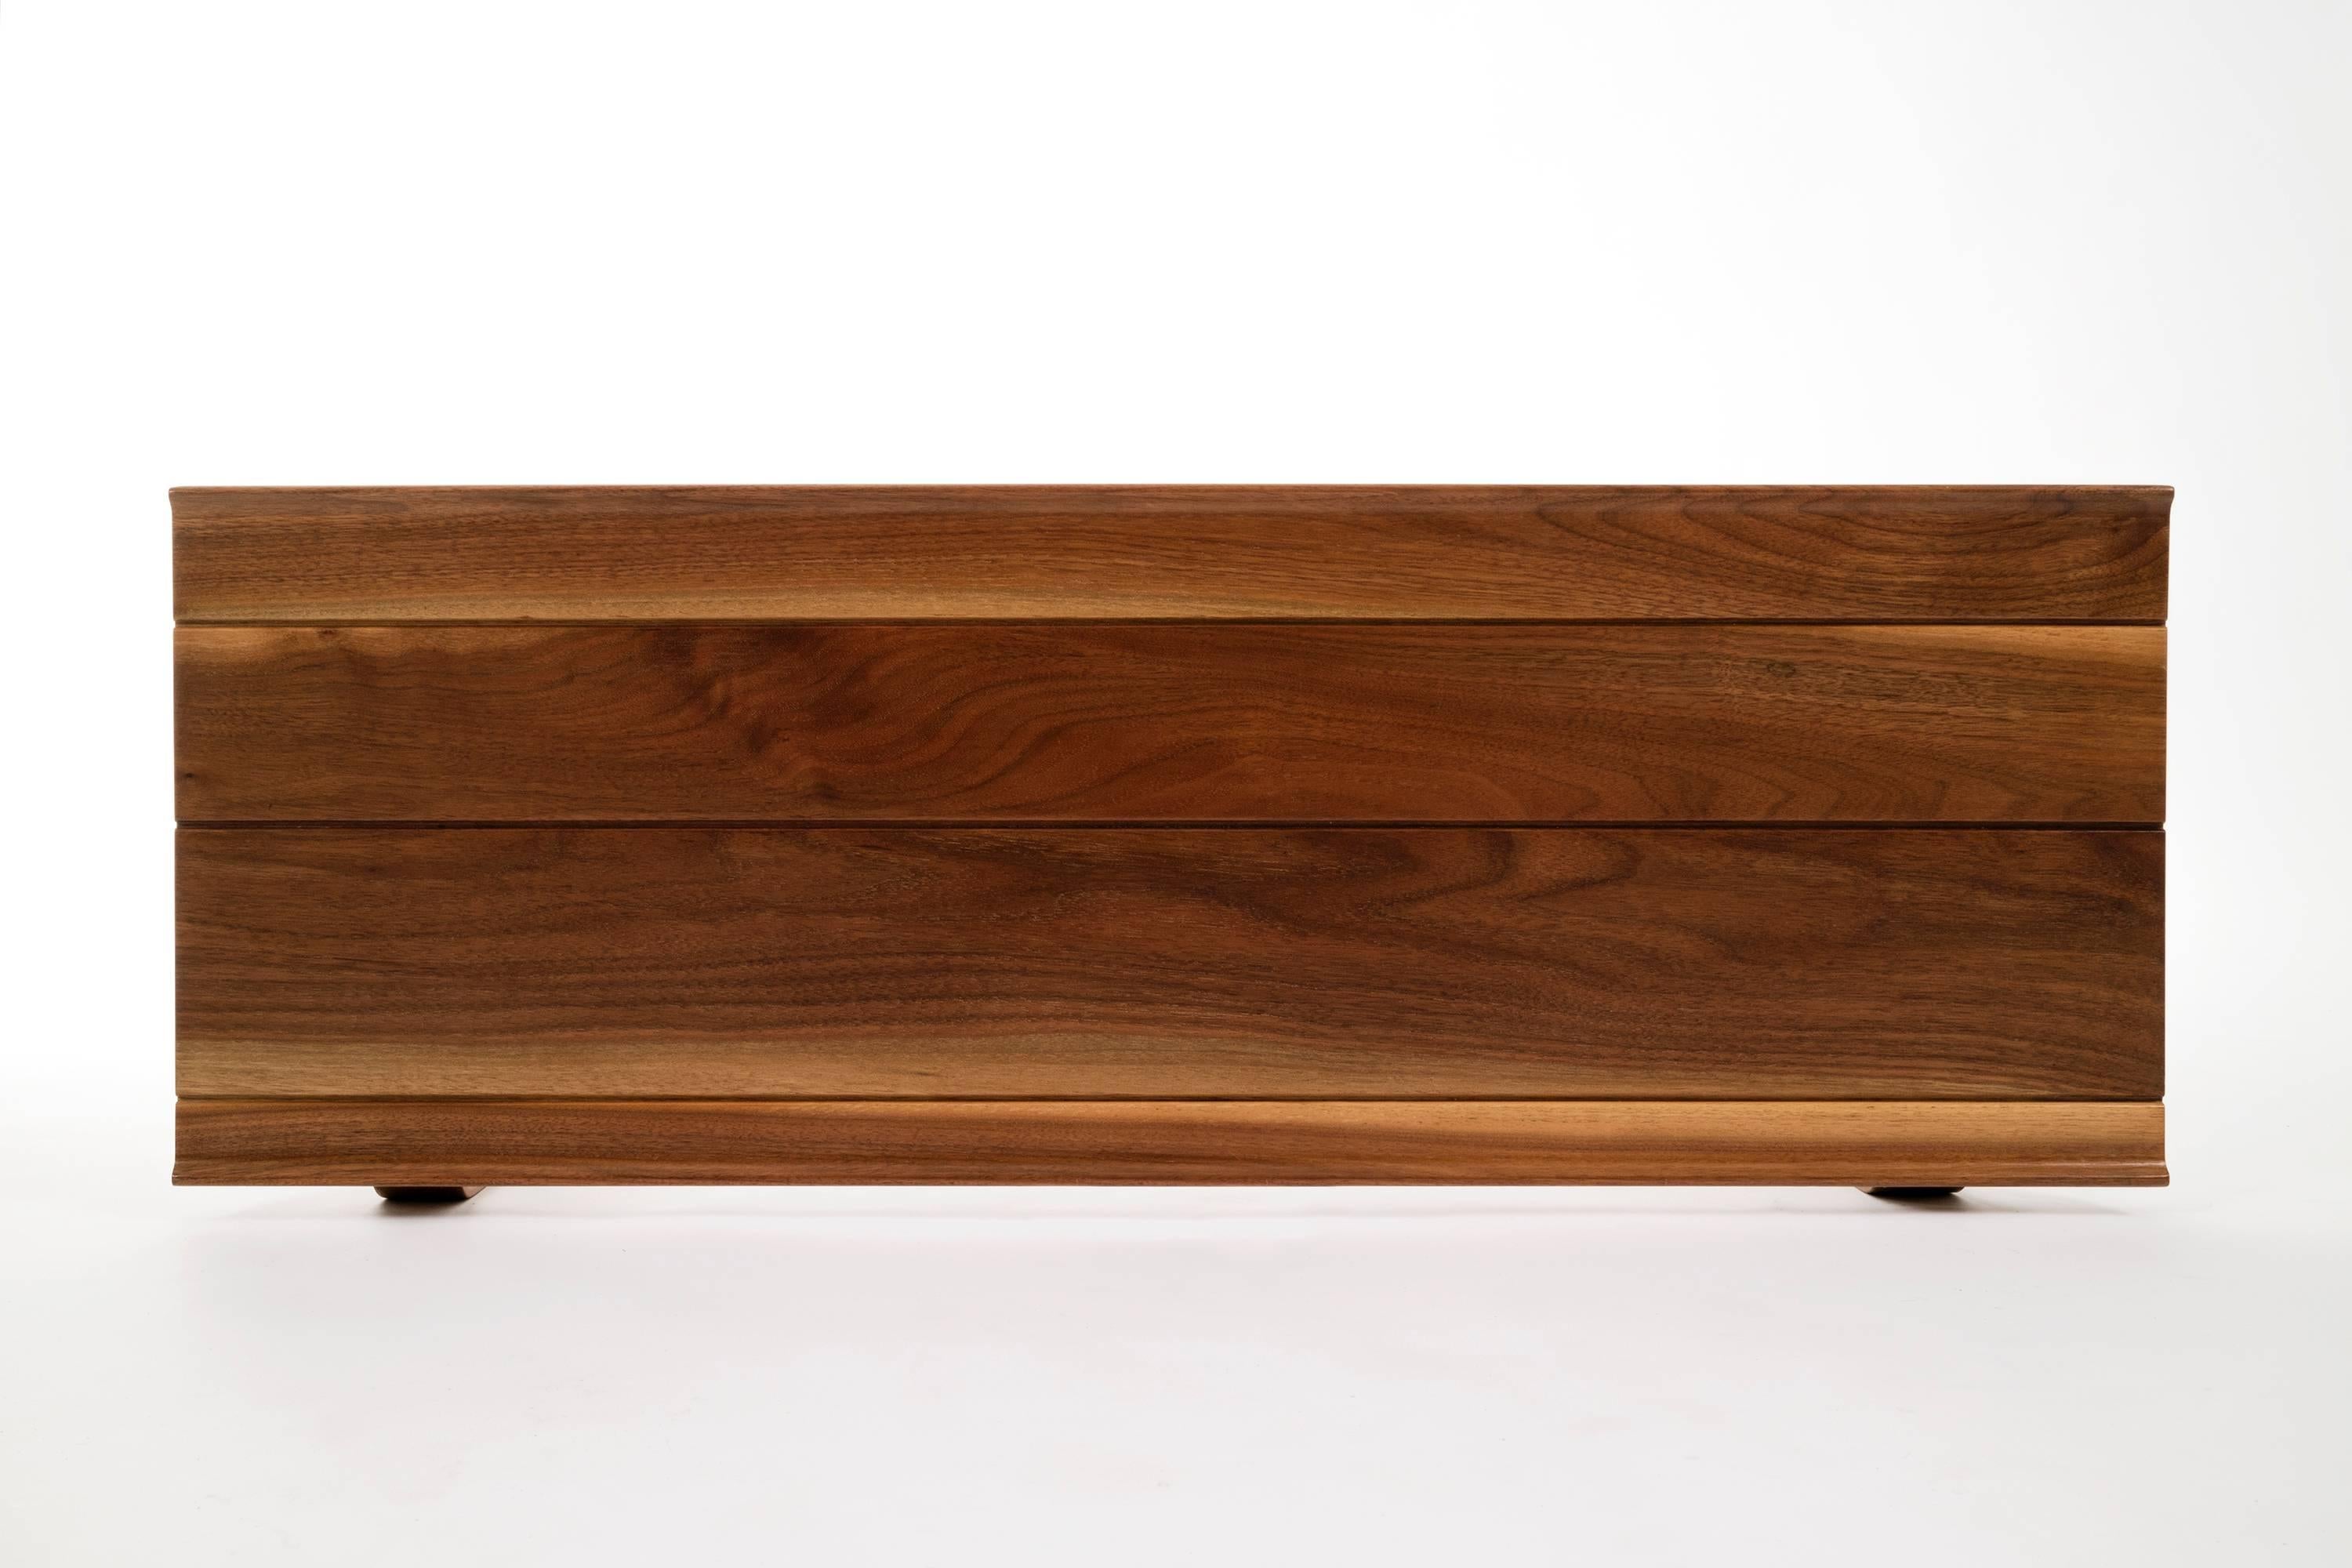 Designed by Edward Wormley for Dunbar. Long John Shelf can be used as shelf or console. Walnut wood with great sapwood striped details.